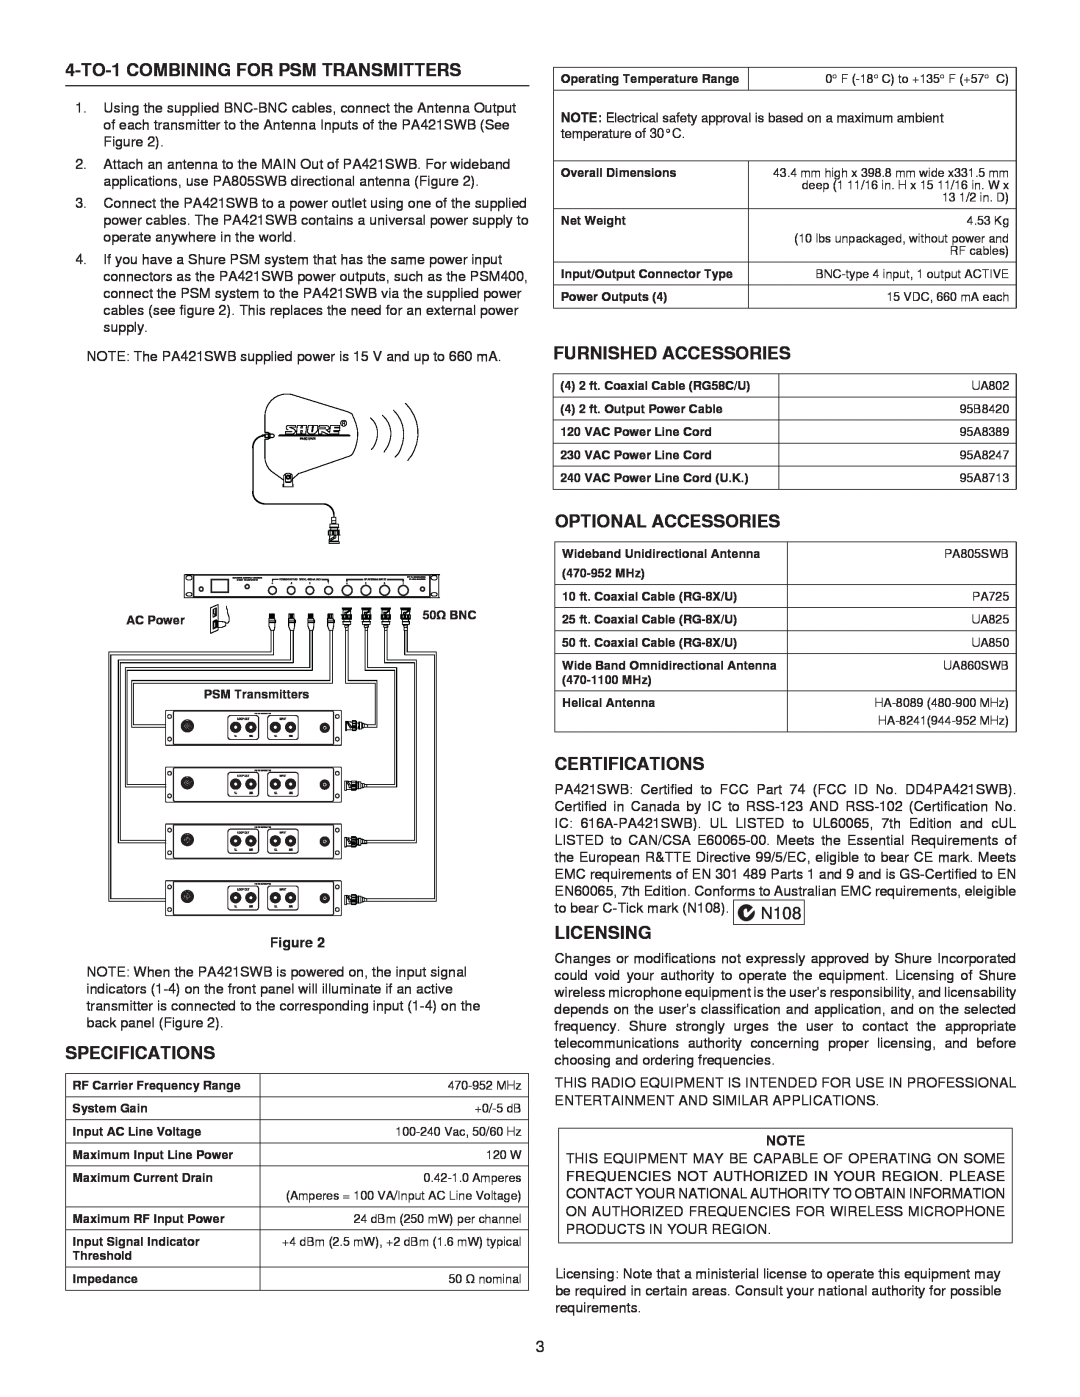 Shure PA421SWB 4-TO-1 COMBINING FOR PSM TRANSMITTERS, Specifications, Furnished Accessories, Optional Accessories, N108 